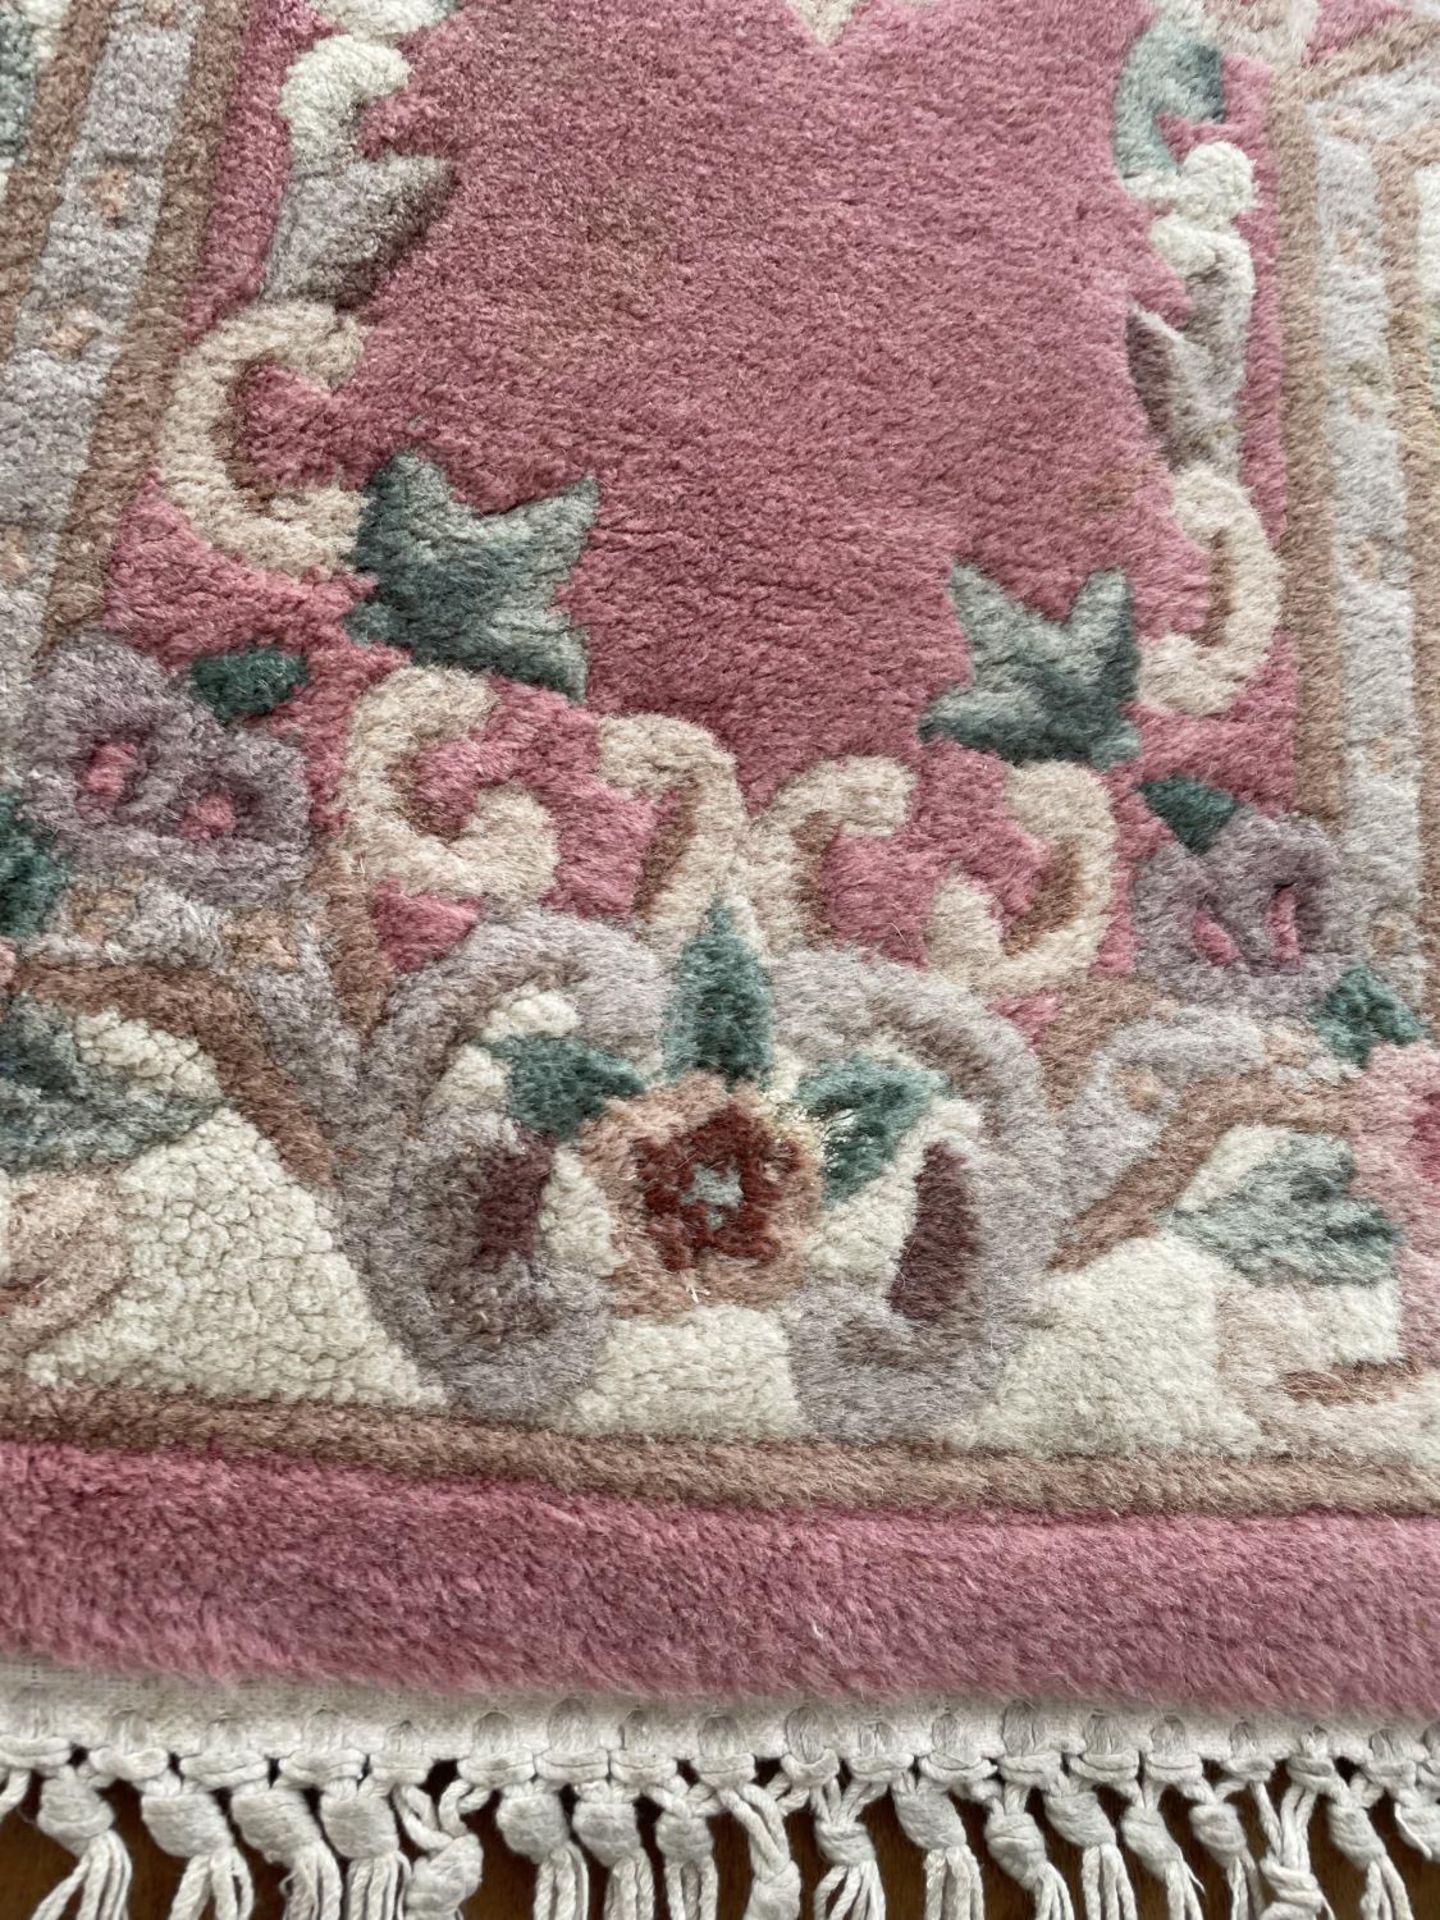 A SMALL PINK PATTERNED RUG - Image 2 of 2